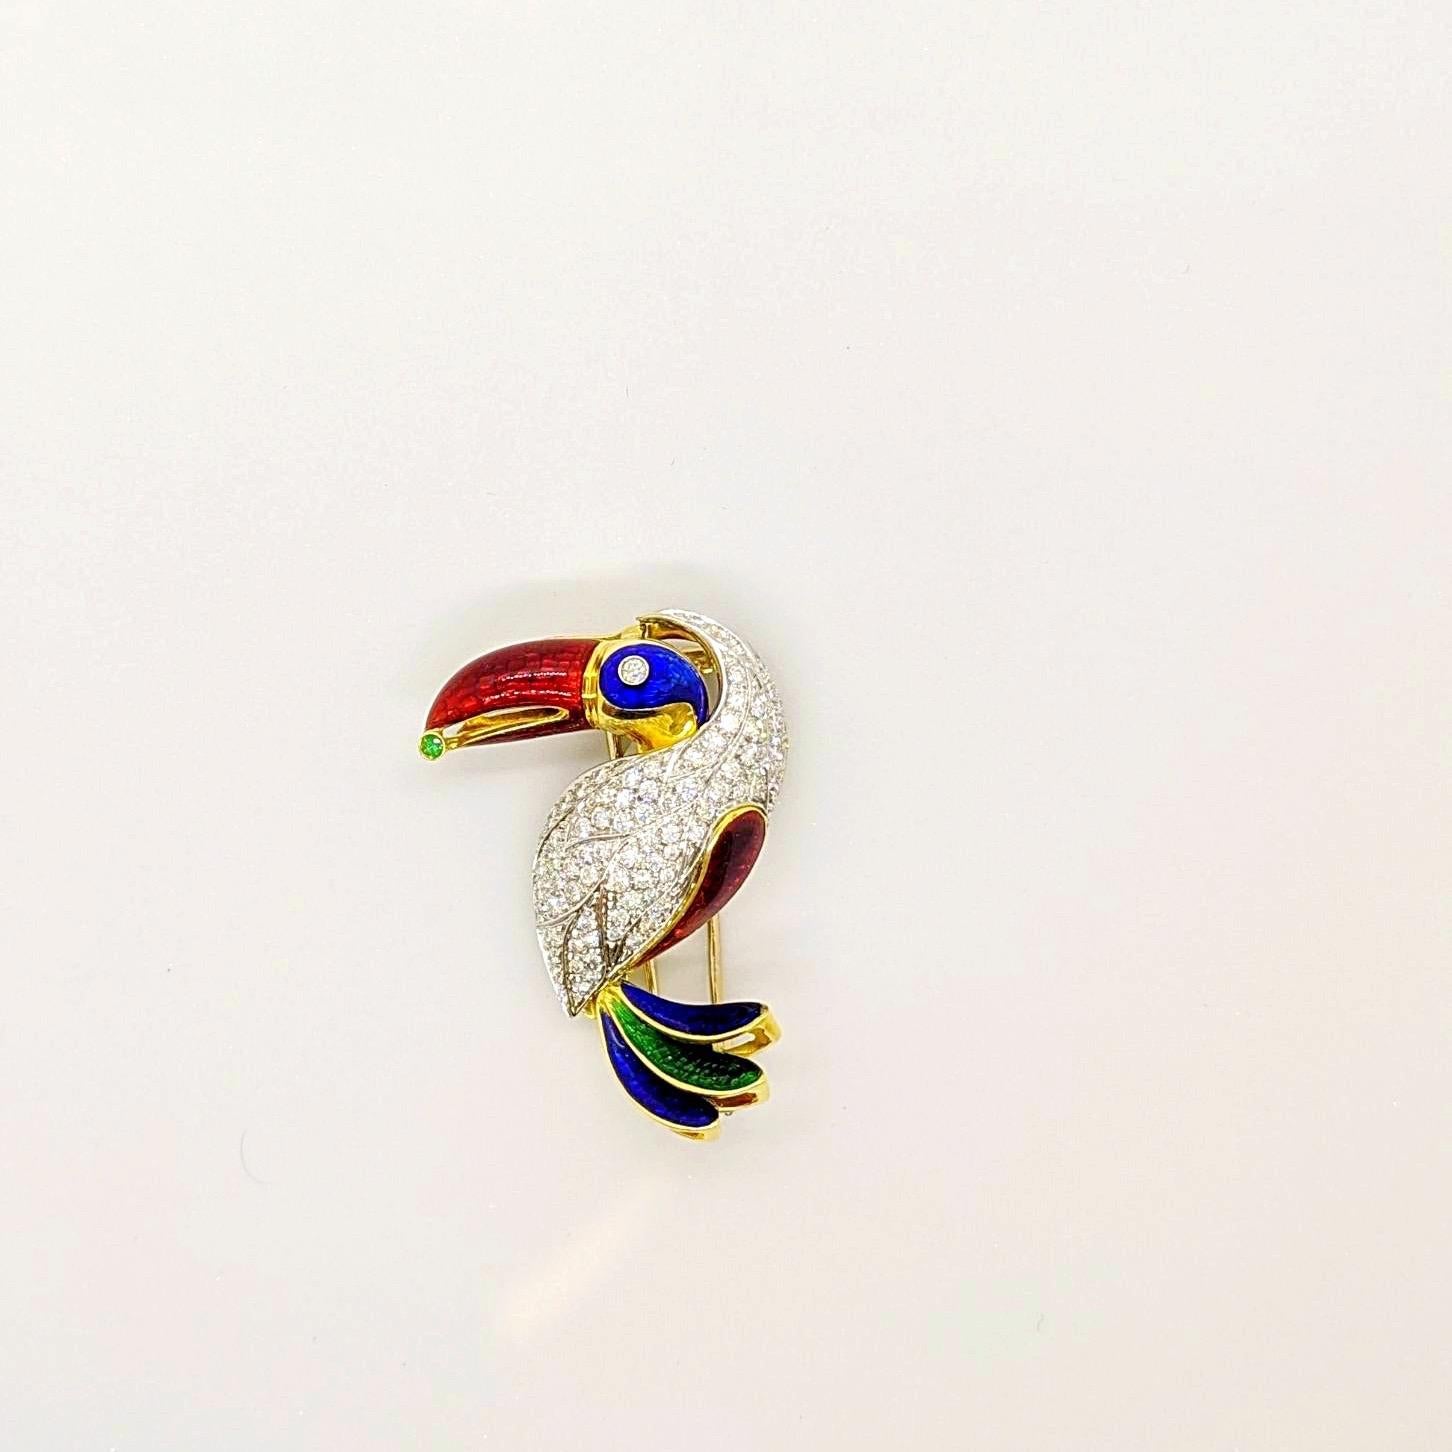 Contemporary 18KT Yellow & White Gold Toucan Brooch with 2.18 Carat Diamonds & Colored Enamel For Sale